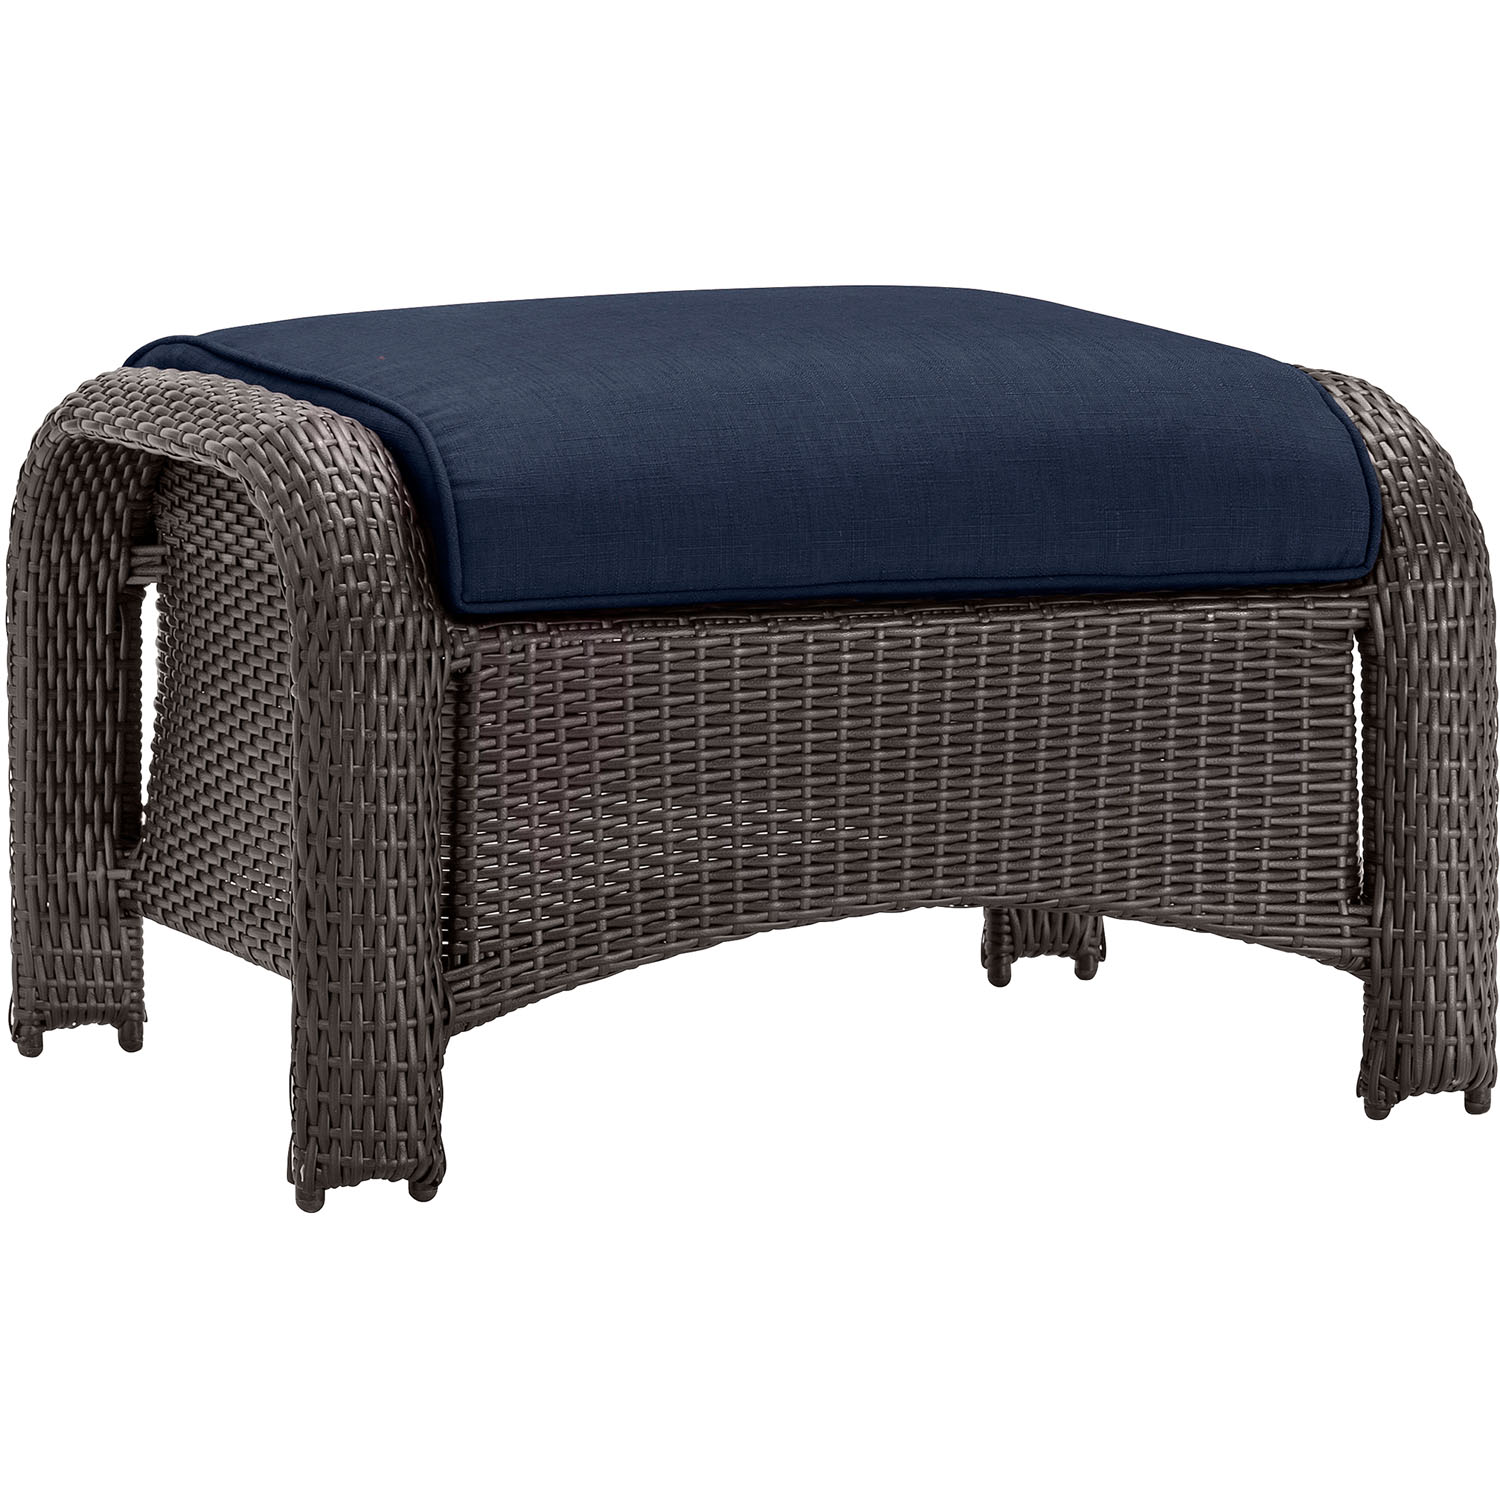 Hanover Strathmere 6-Piece Hand-Woven Wicker Chat Set with Fire Pit Table | Luxury Outdoor Furniture | UV Protected Cushions | Rust and Weather Resistant Frame | Navy | STRATH6PCFP-NVY-WG - image 5 of 12